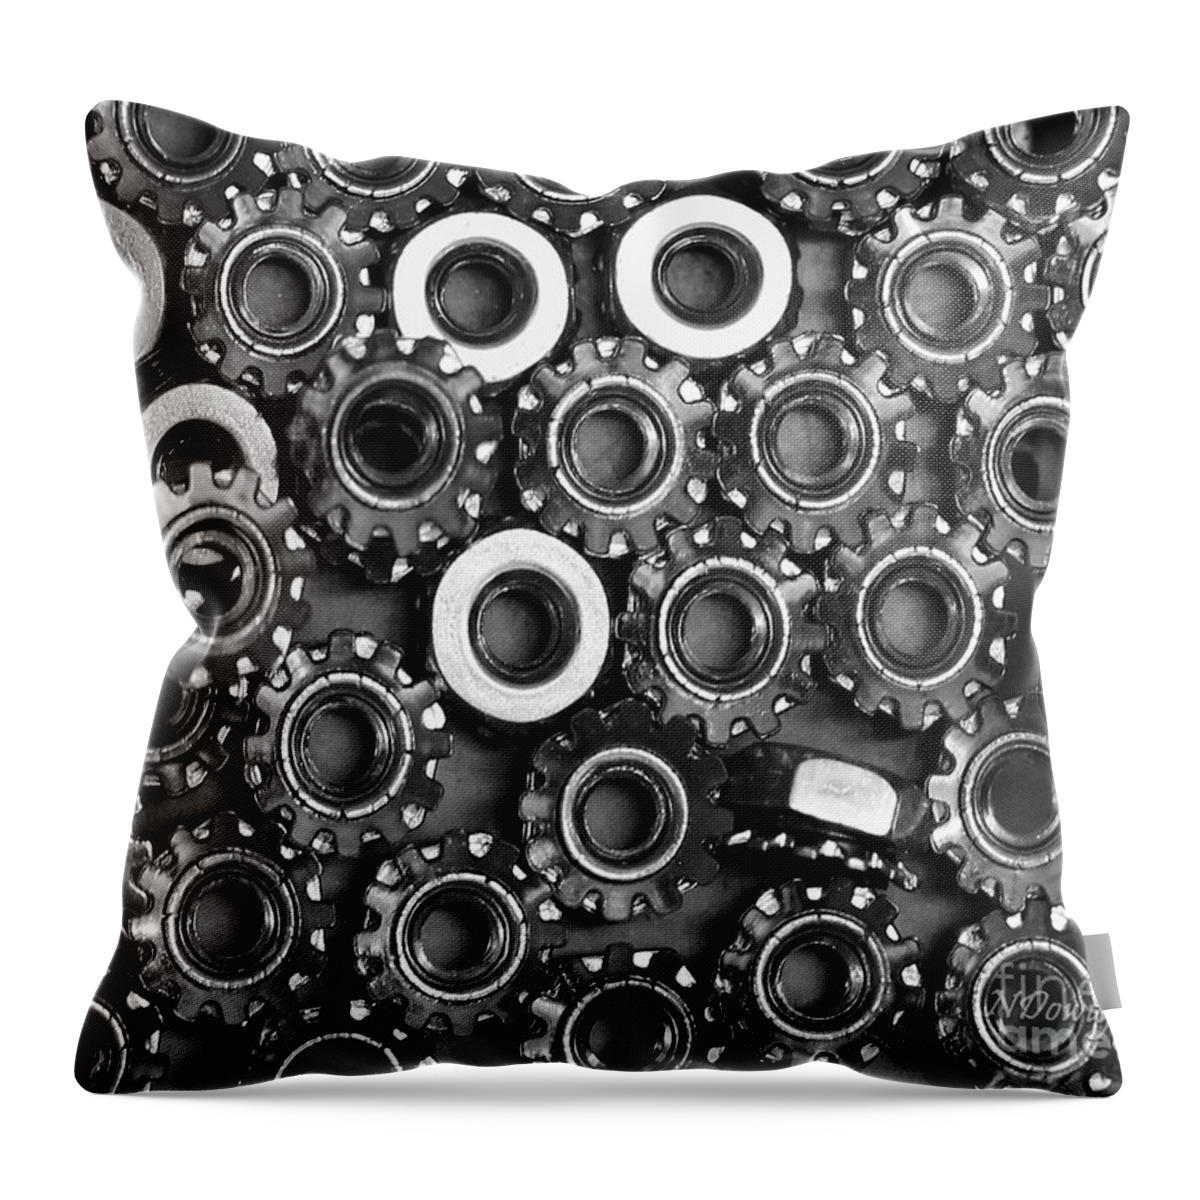 Washers Throw Pillow featuring the photograph Washers by Natalie Dowty